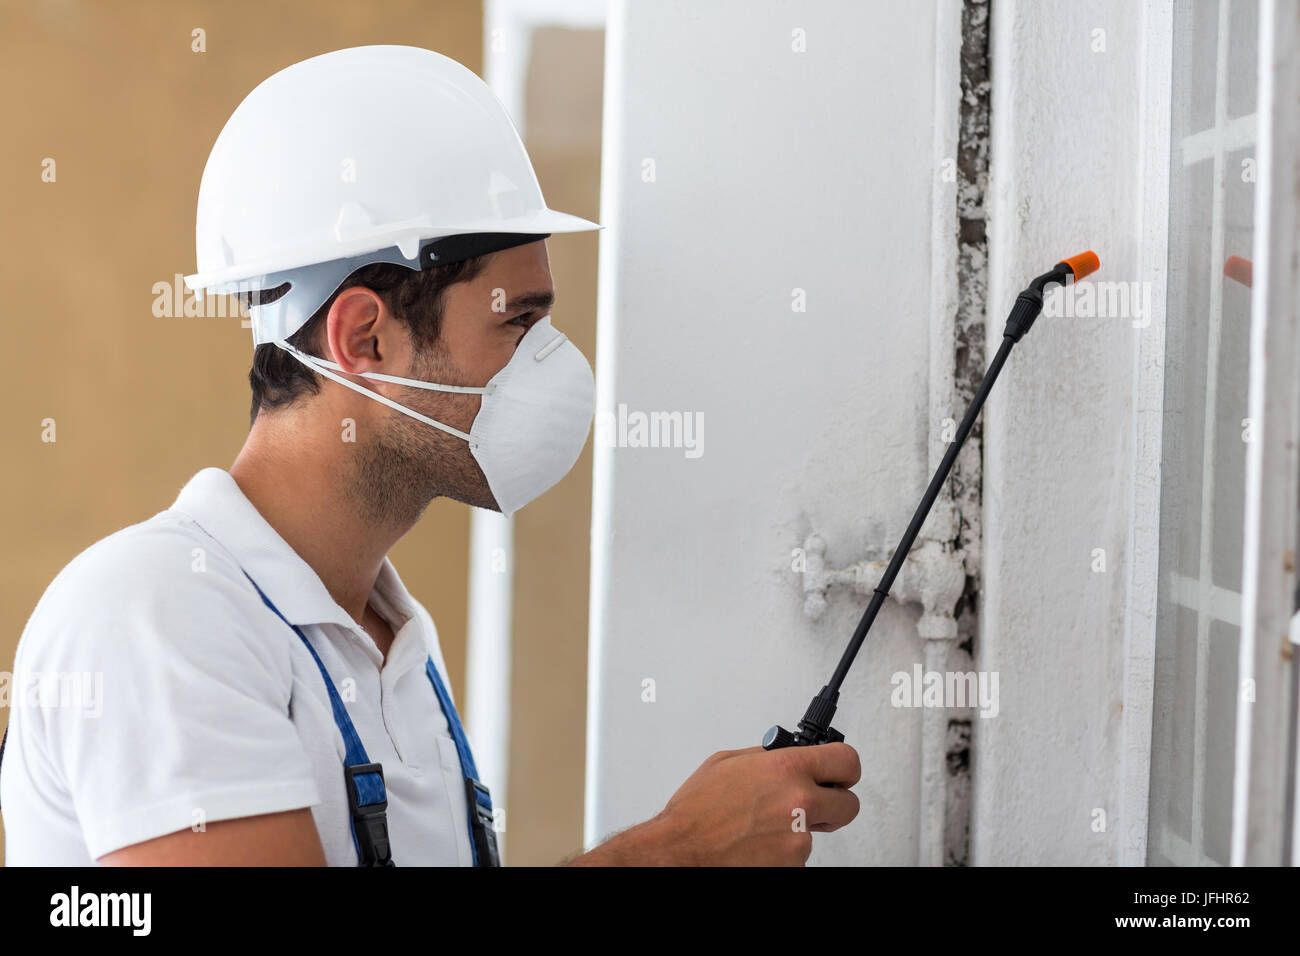 Side view of manual worker spraying pesticide Stock Photo